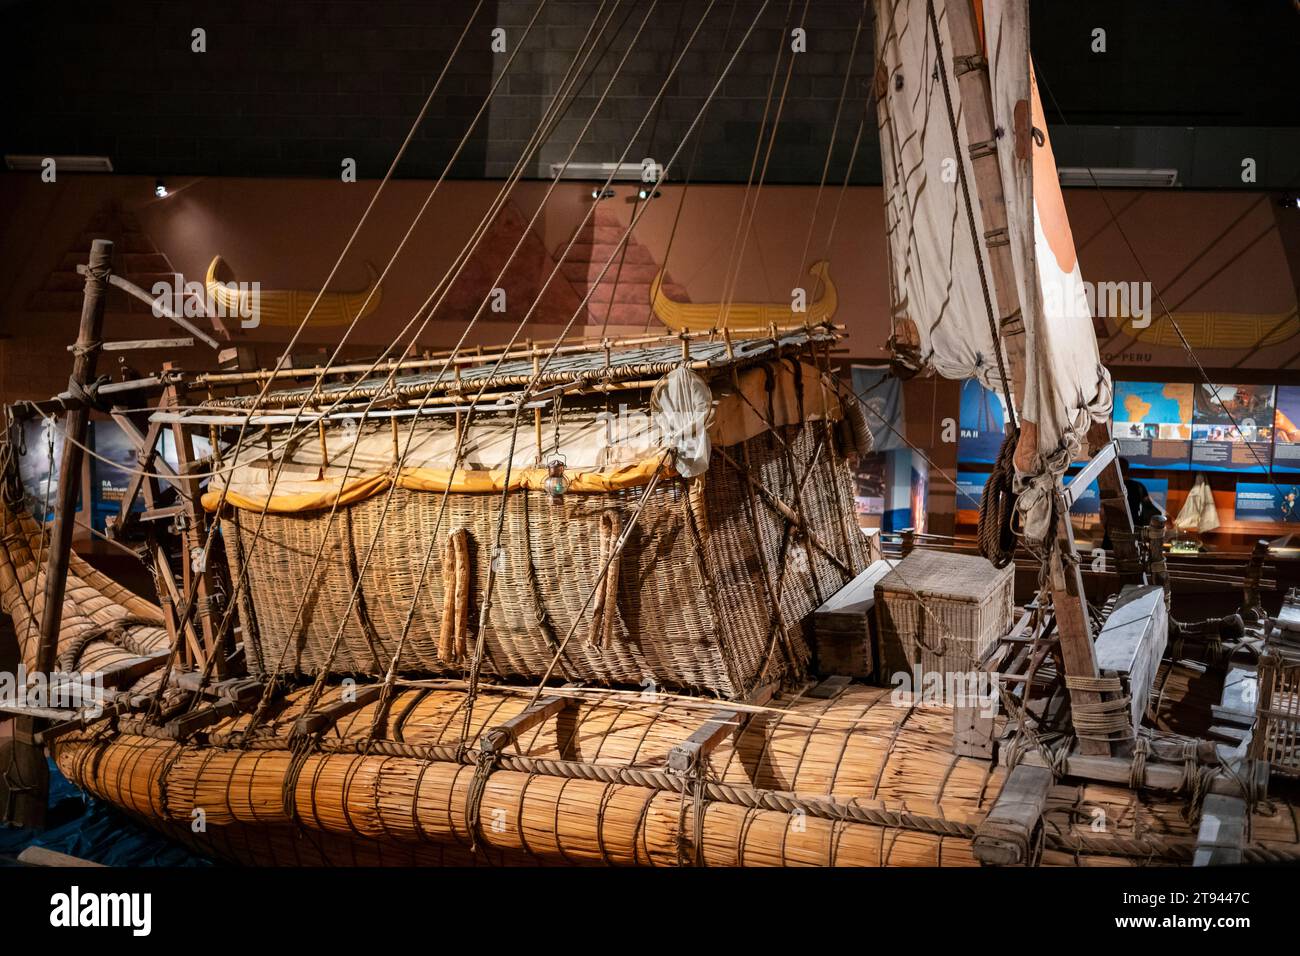 Oslo, Norway, June 21, 2023:  The Kon-Tiki Museum exhibits objects from Thor Heyerdahl’s world famous expeditions, the original Kon-Tiki raft, and the Stock Photo